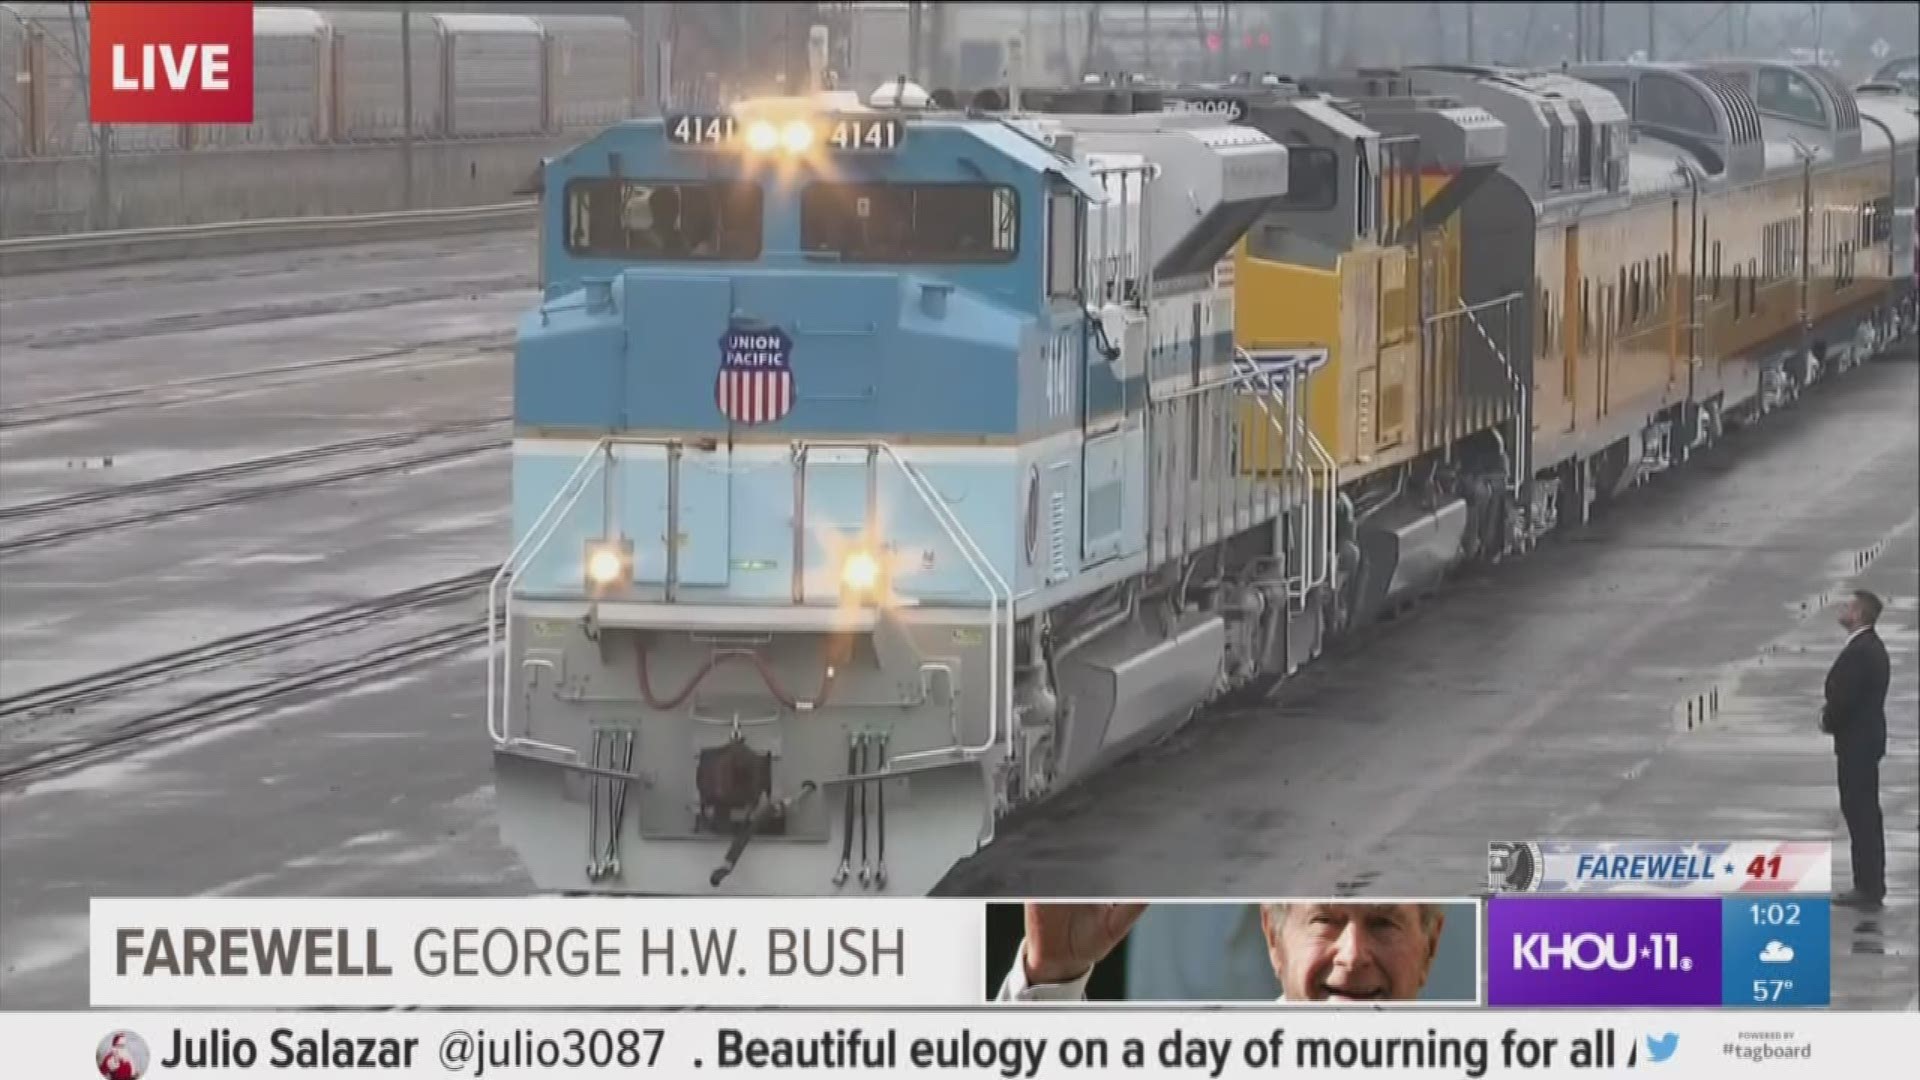 President Bush and his family are now on their way to College Station where he will be laid to rest at the George Bush Library and Museum next to his wife Barbara and daughter Robin.